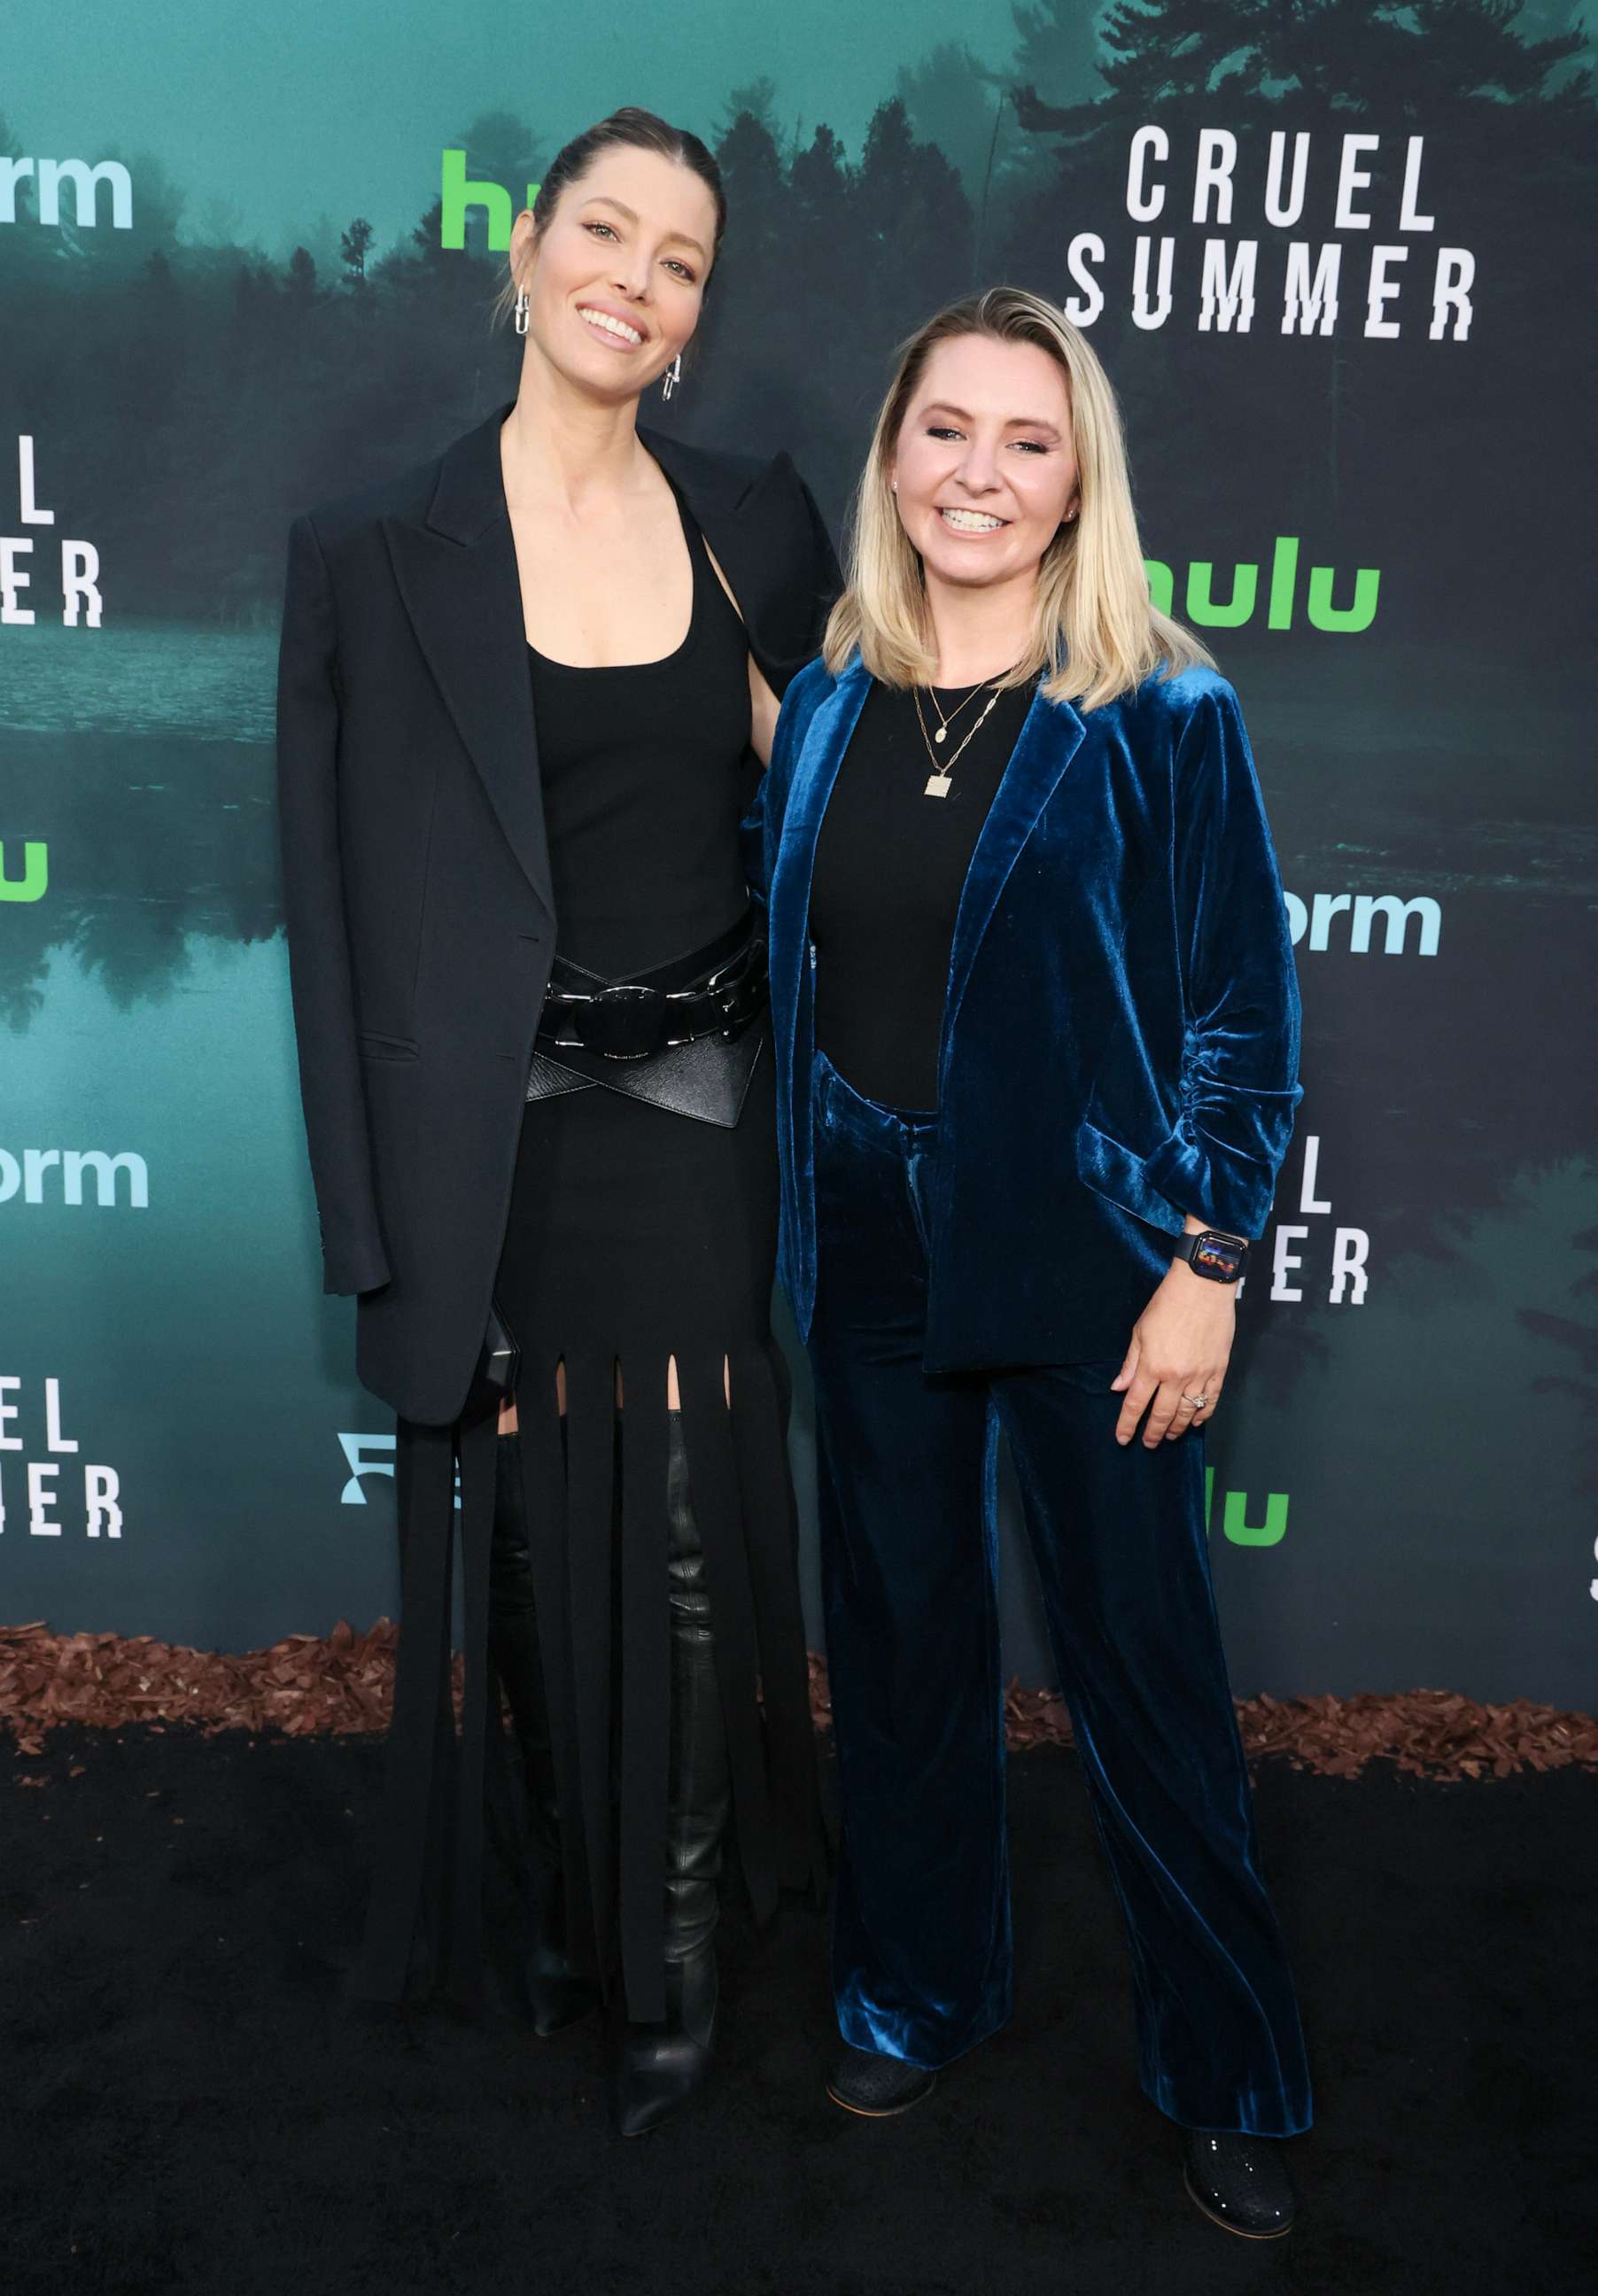 PHOTO: Jessica Biel and Beverley Mitchell attend the Los Angeles premiere of Freeform's "Cruel Summer" season 2 at Grace E. Simons Lodge on May 31, 2023 in Los Angeles.